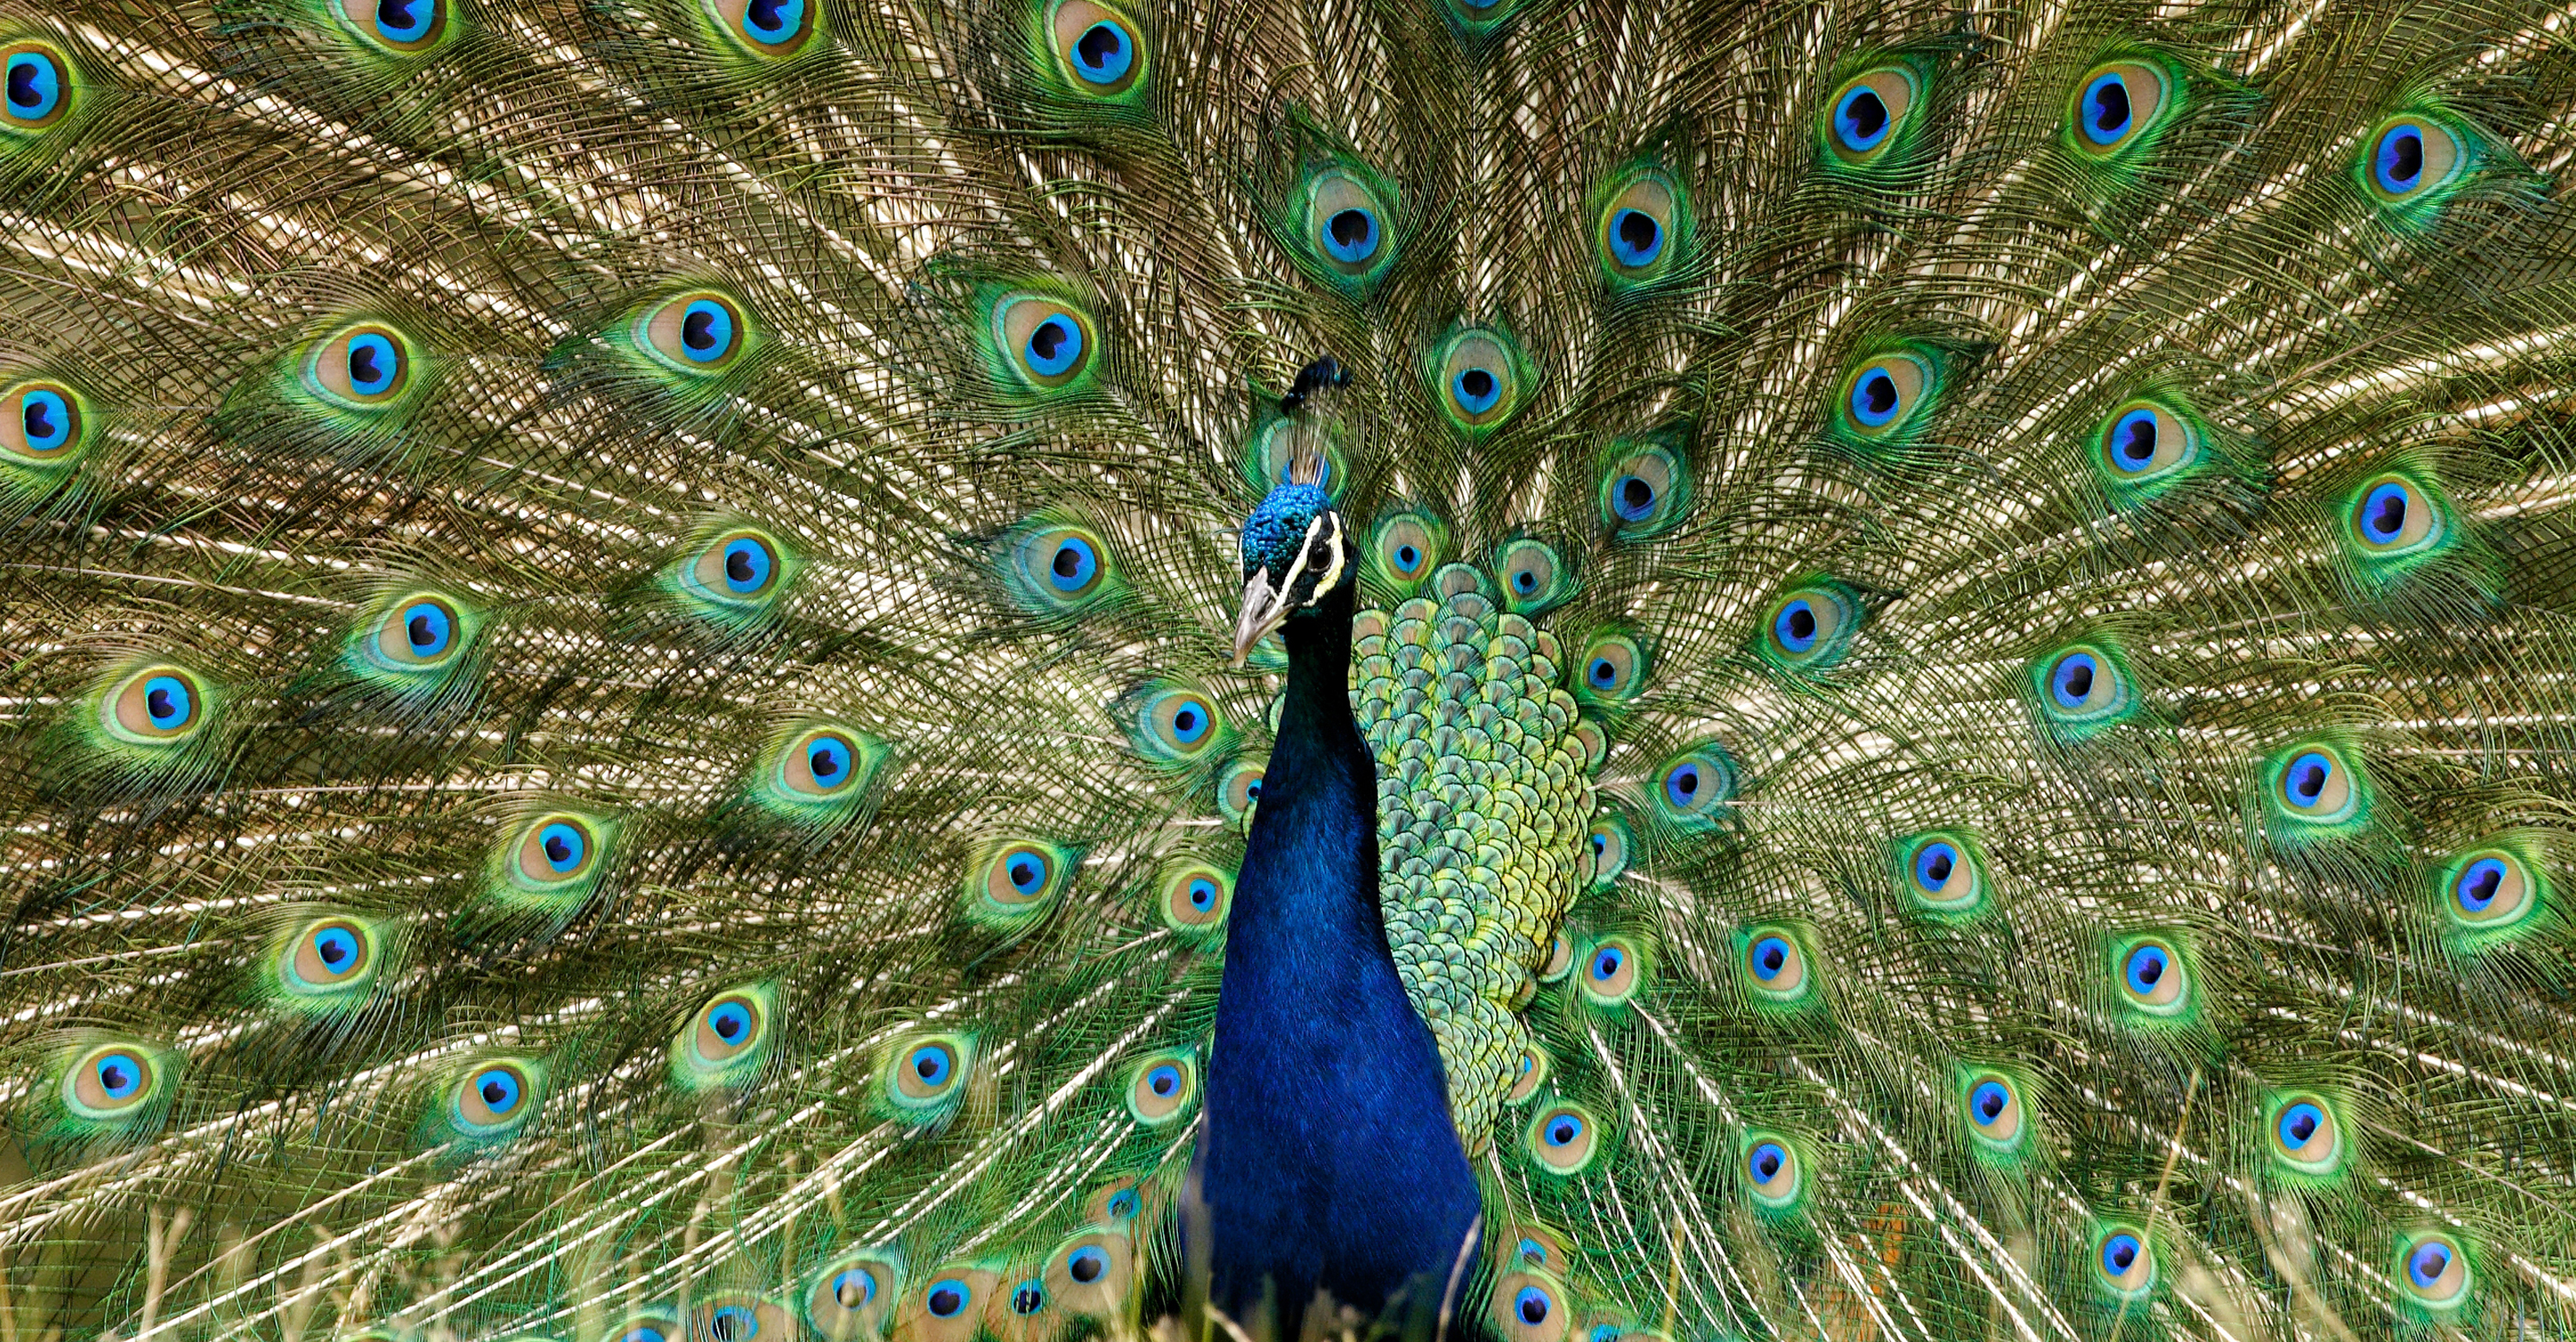 A peacock displays his tail feathers during mating season in Ranthambore National Park, India